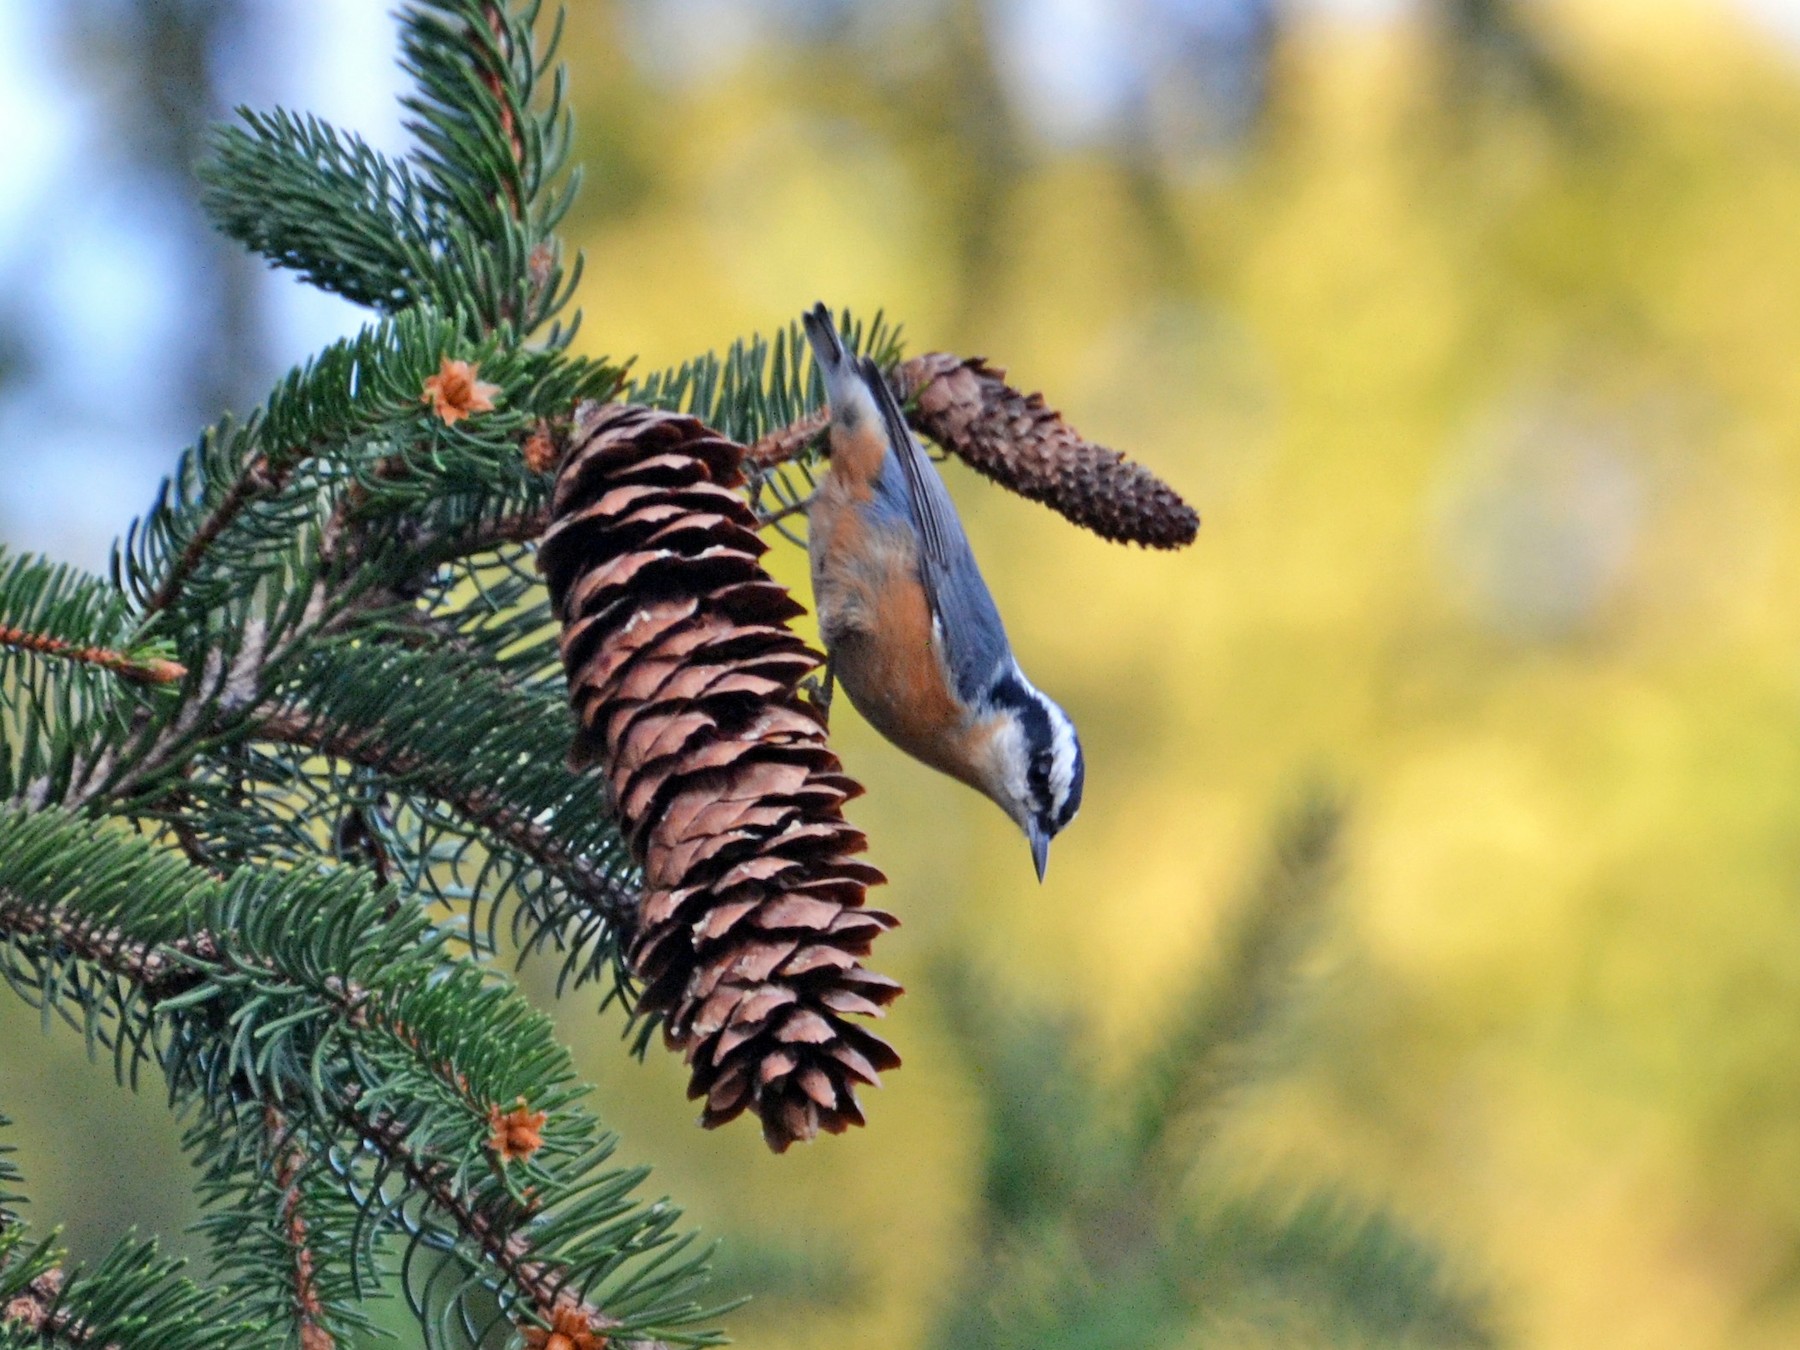 Red-breasted Nuthatch - Kristen Johnson